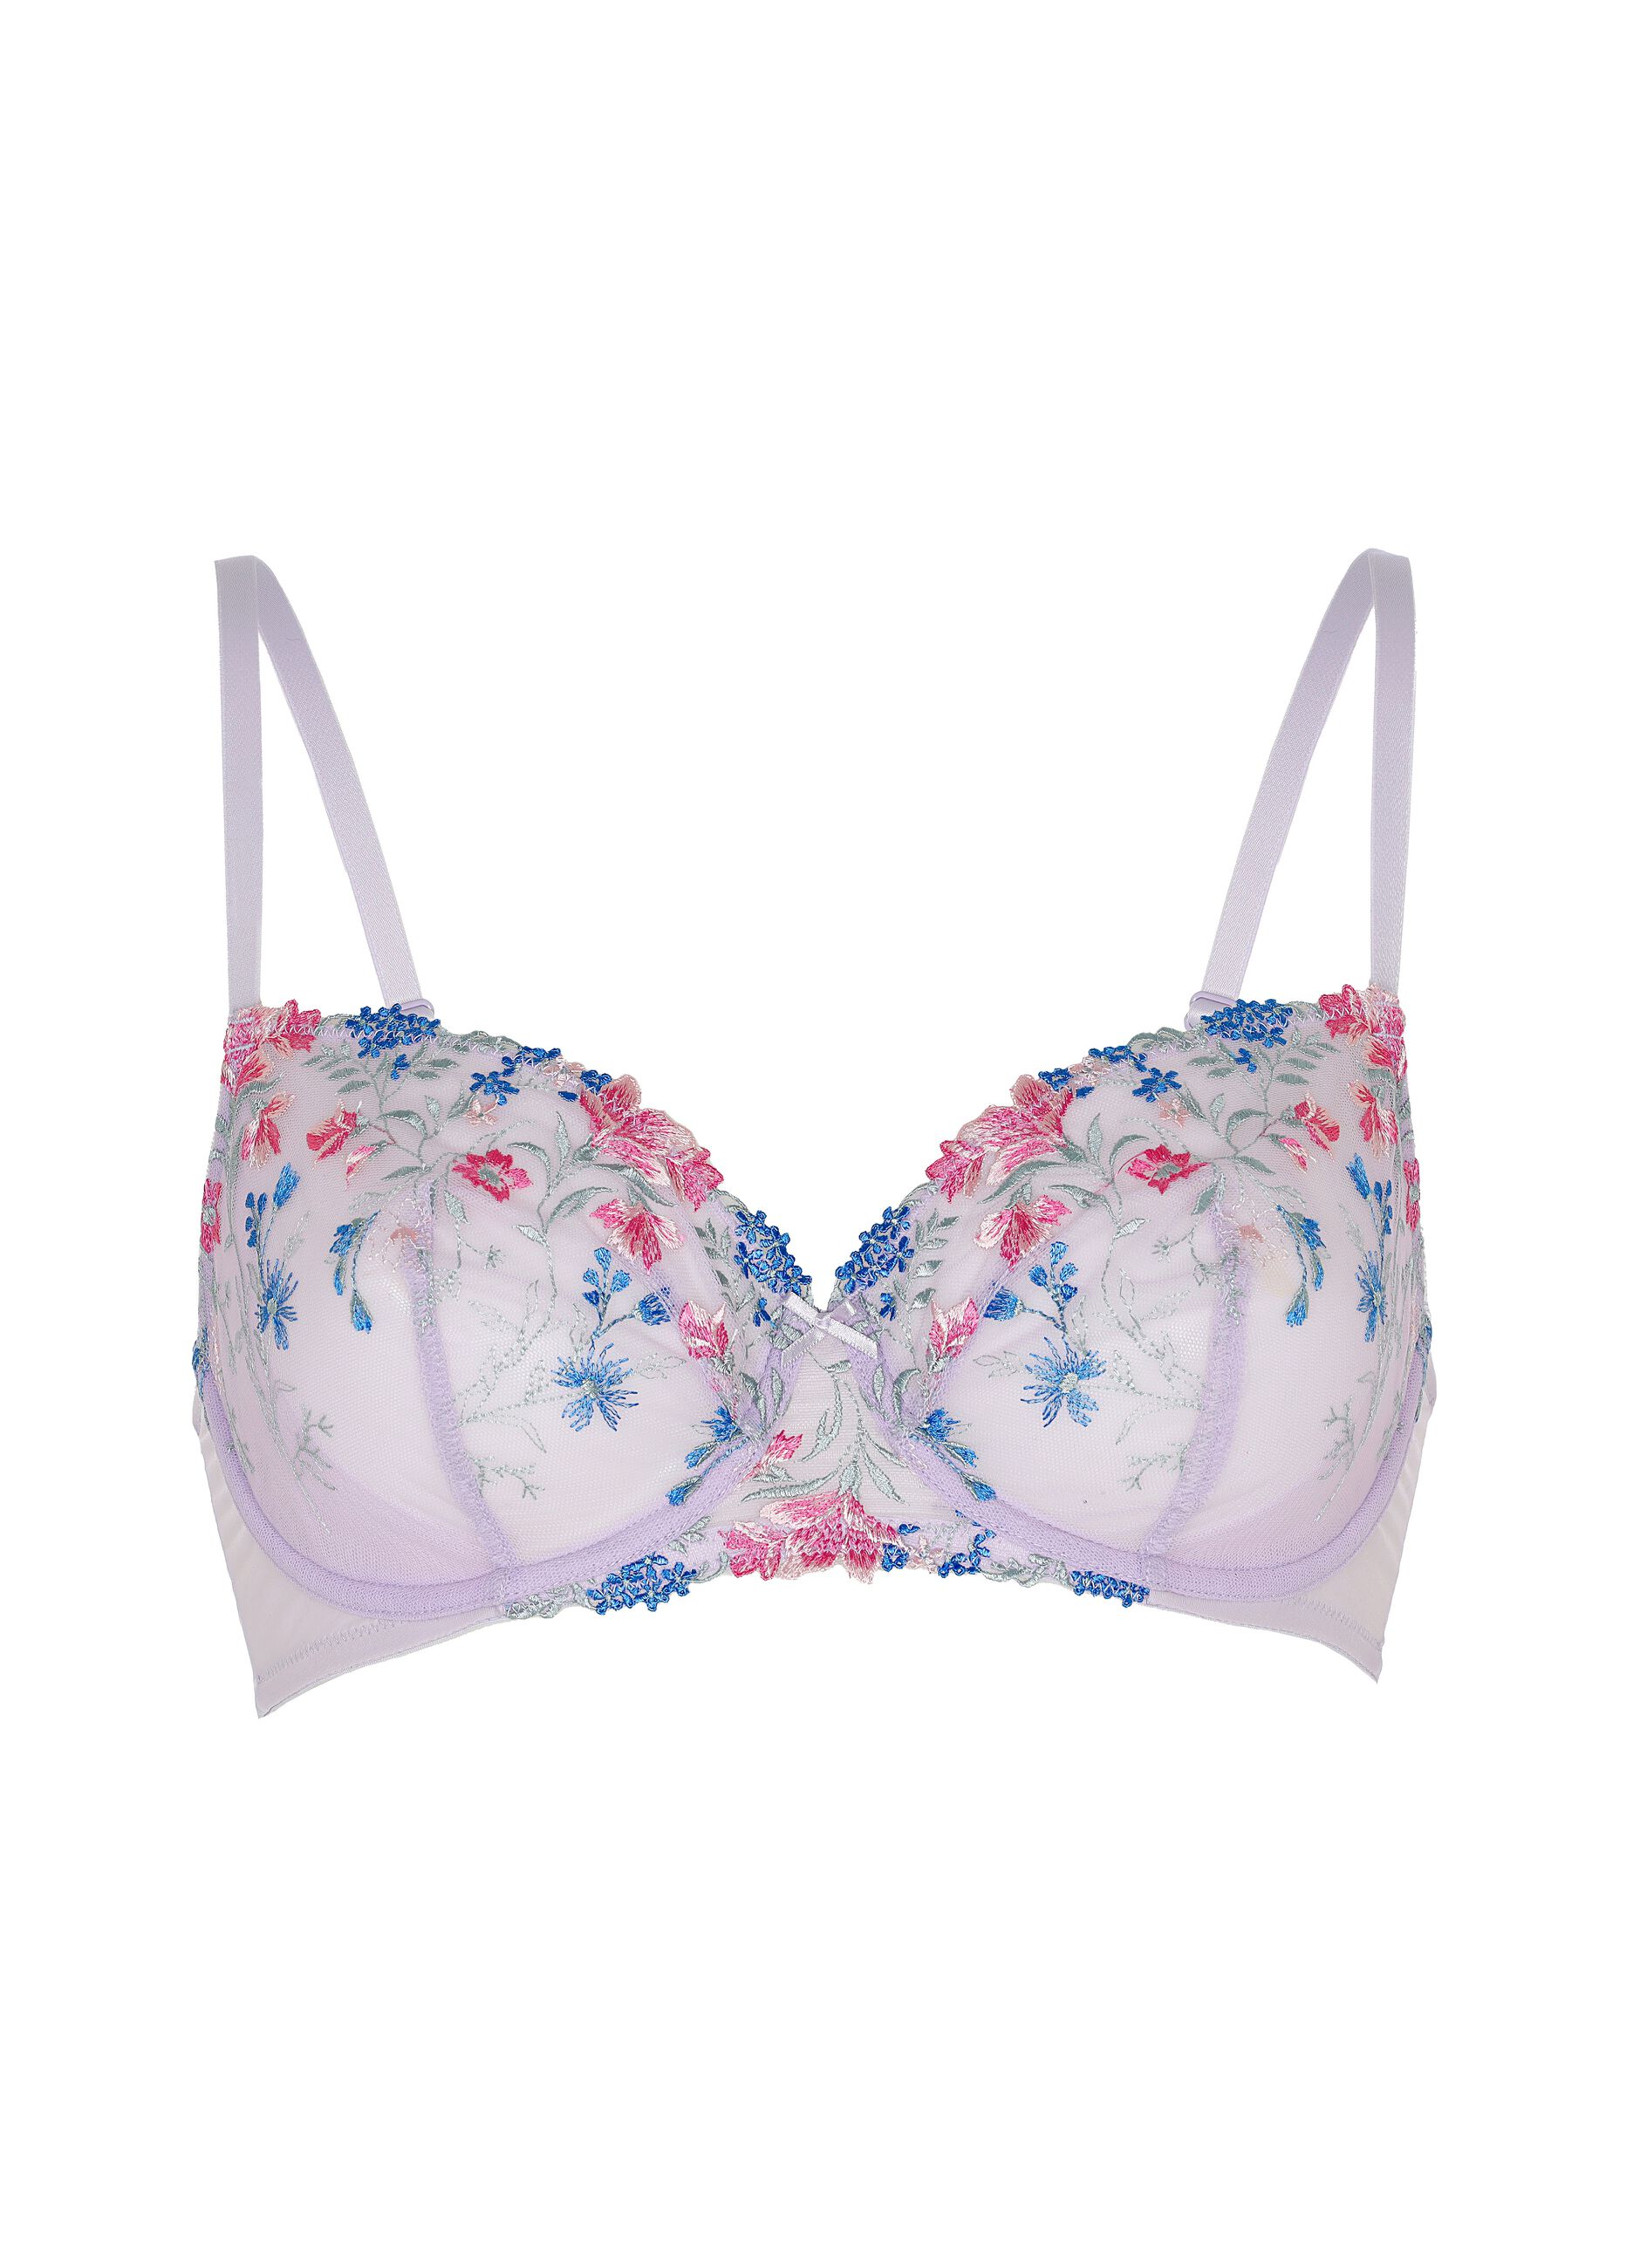 Embroidery Lace bra with underwiring